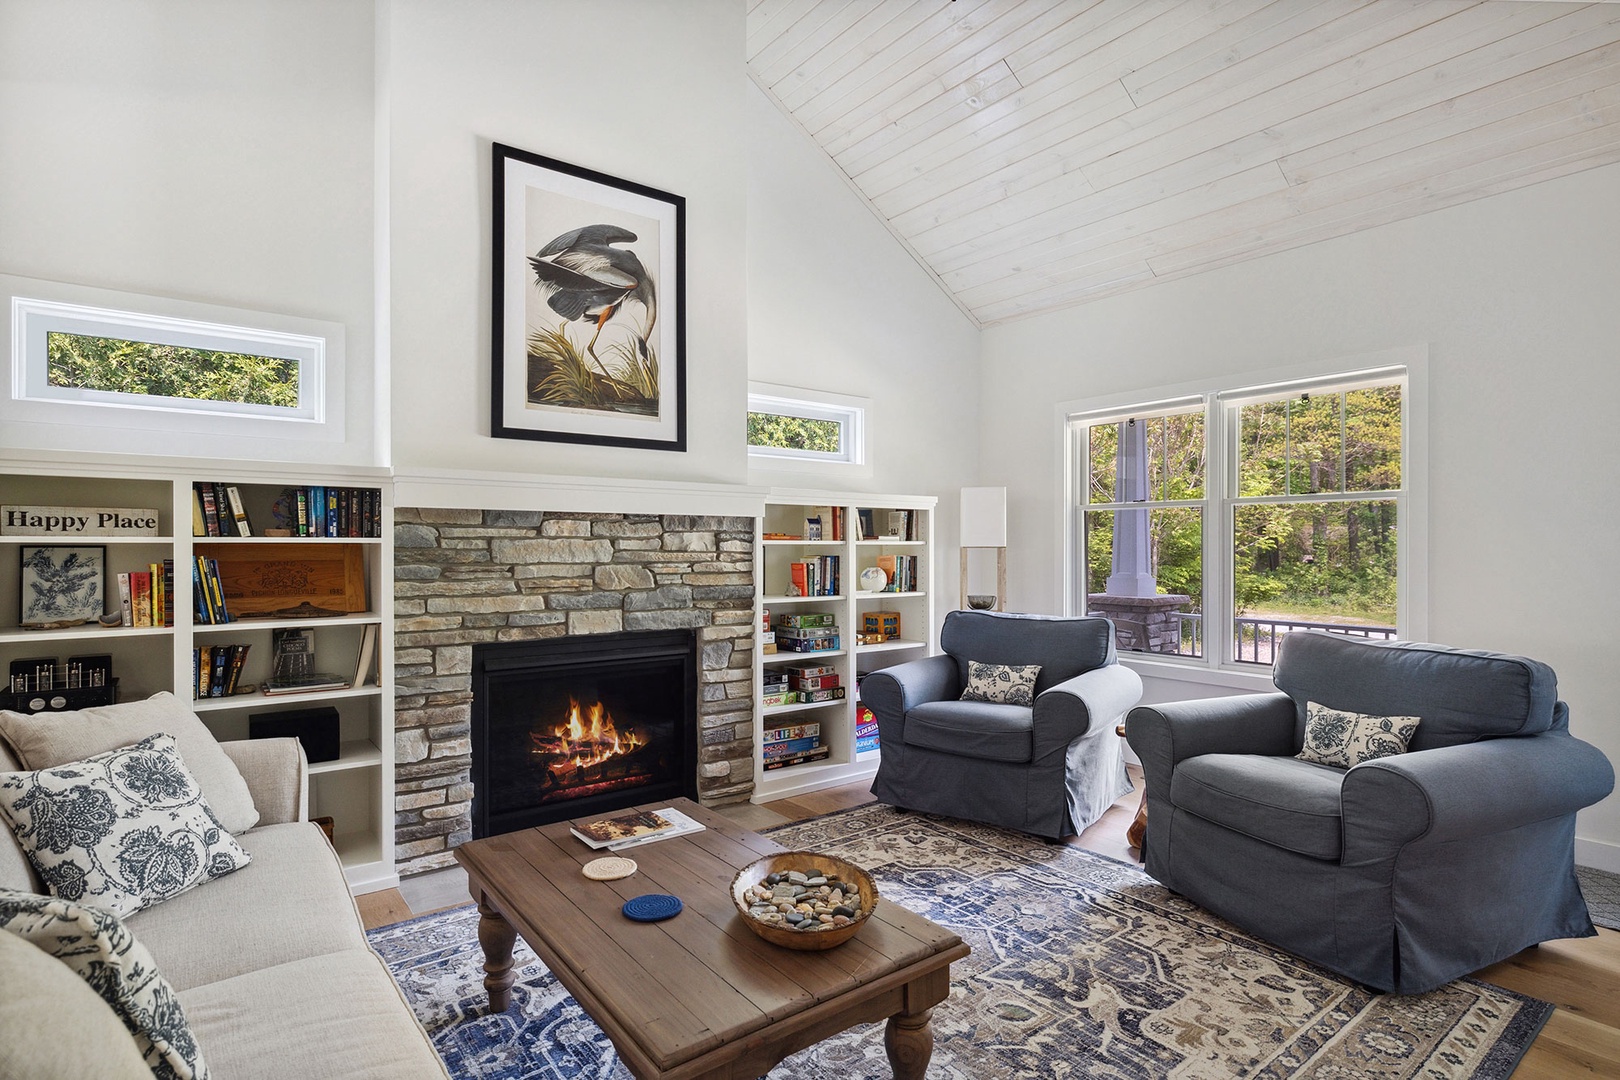 Lounge in the cozy living area with stone-trimmed fireplace in chillier weather.